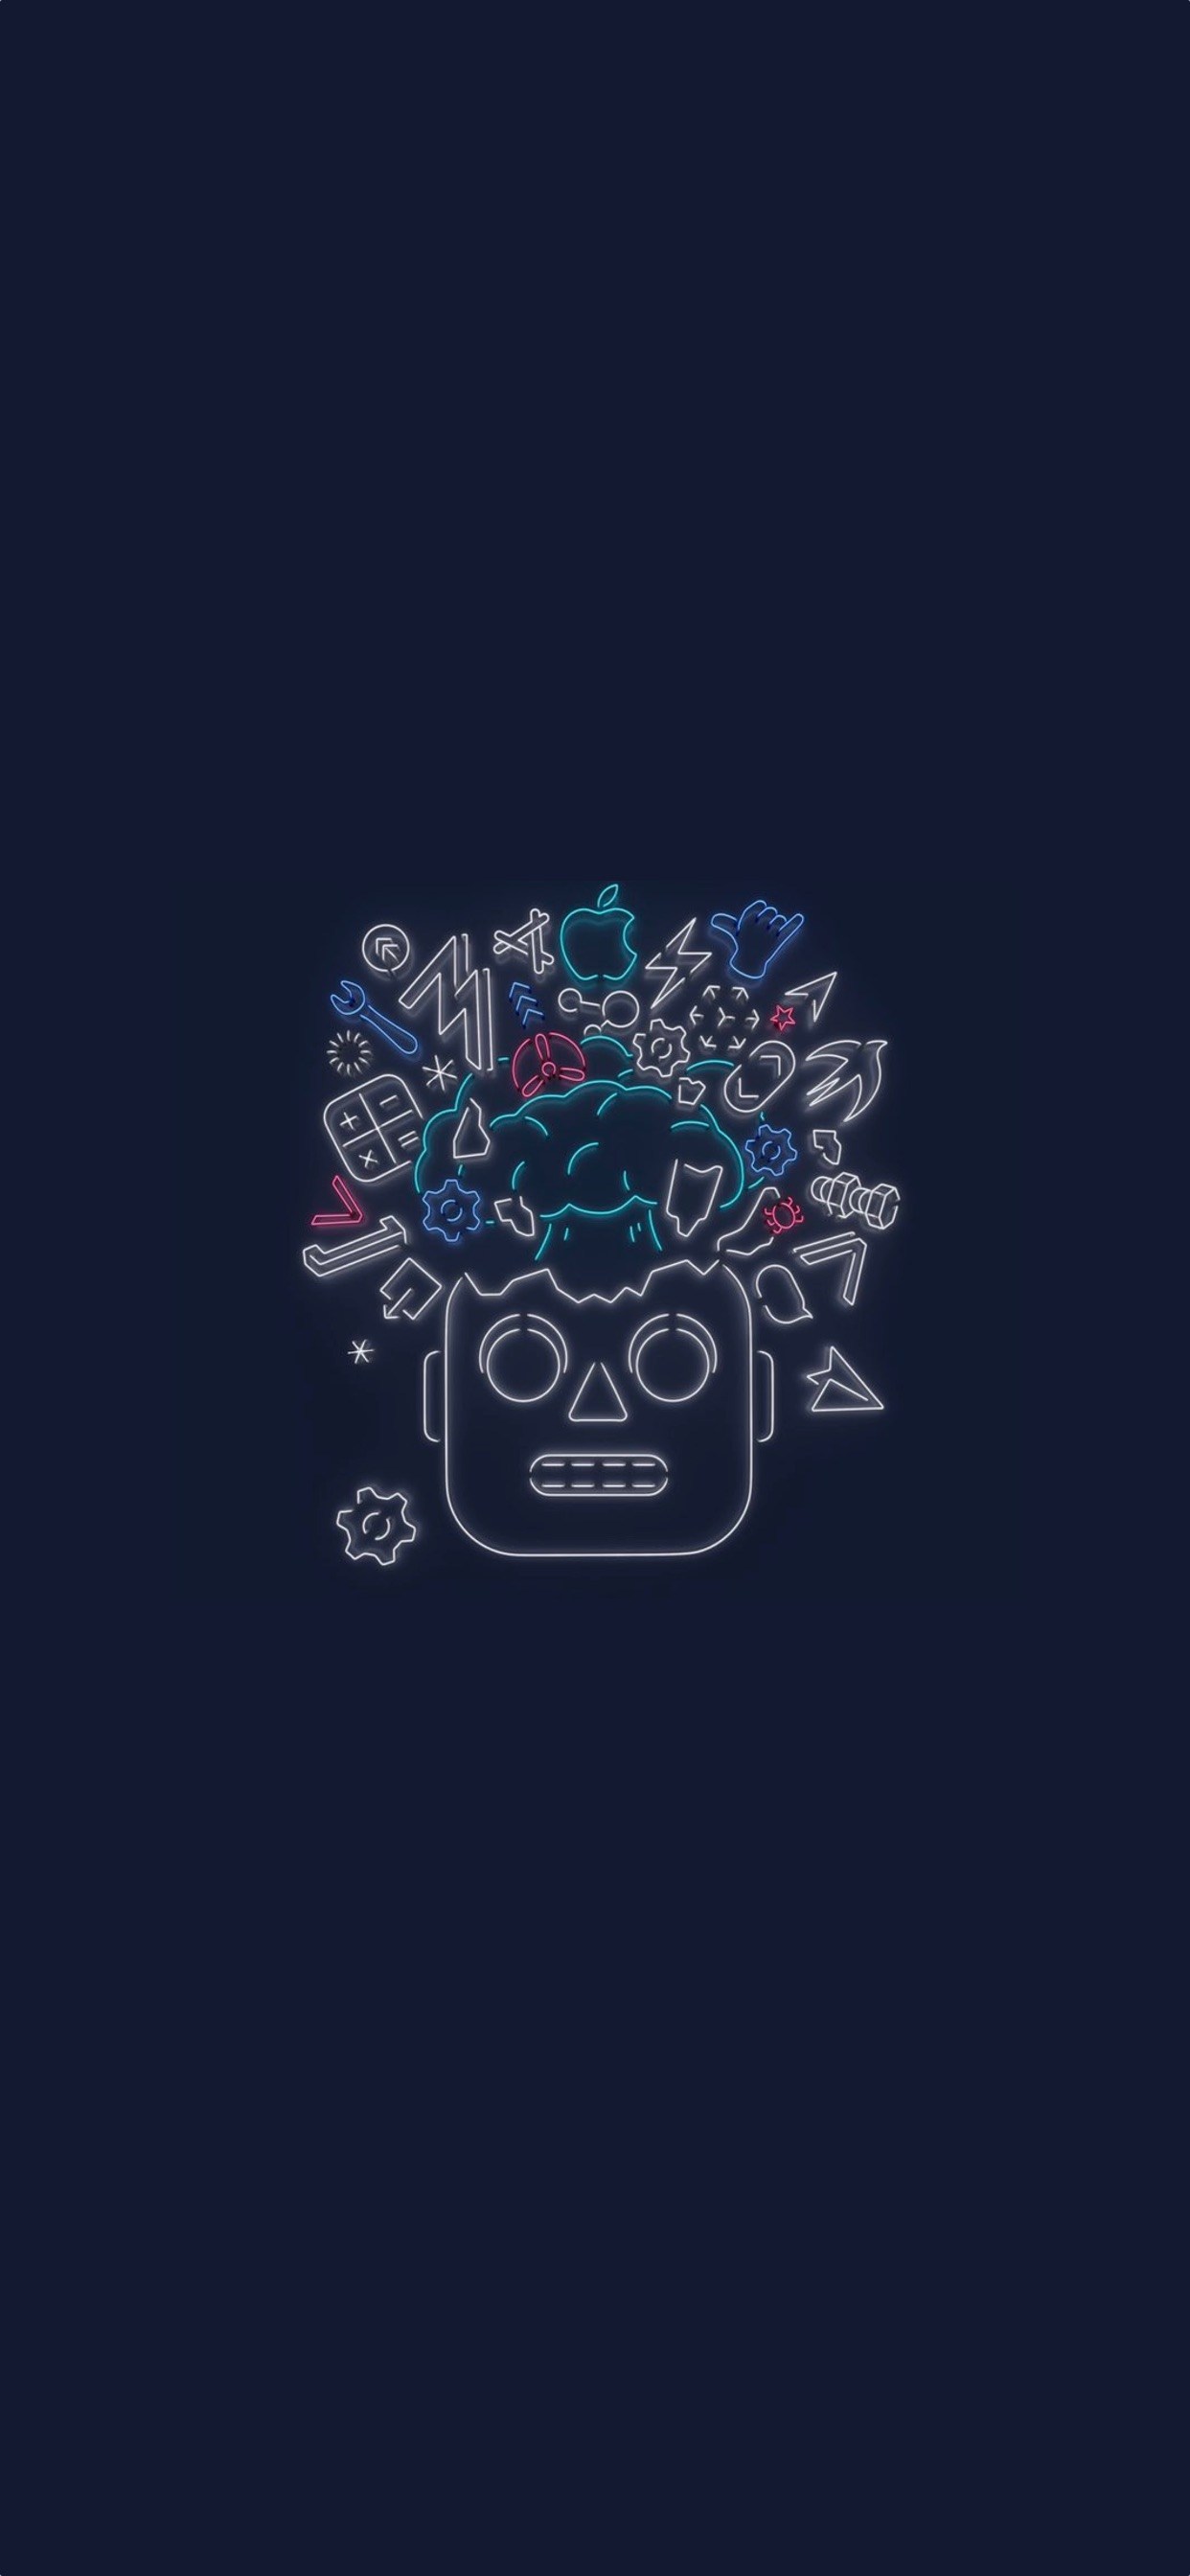 Wwdc 2019 Iphone Wallpaper Without Tagline - Illustration , HD Wallpaper & Backgrounds